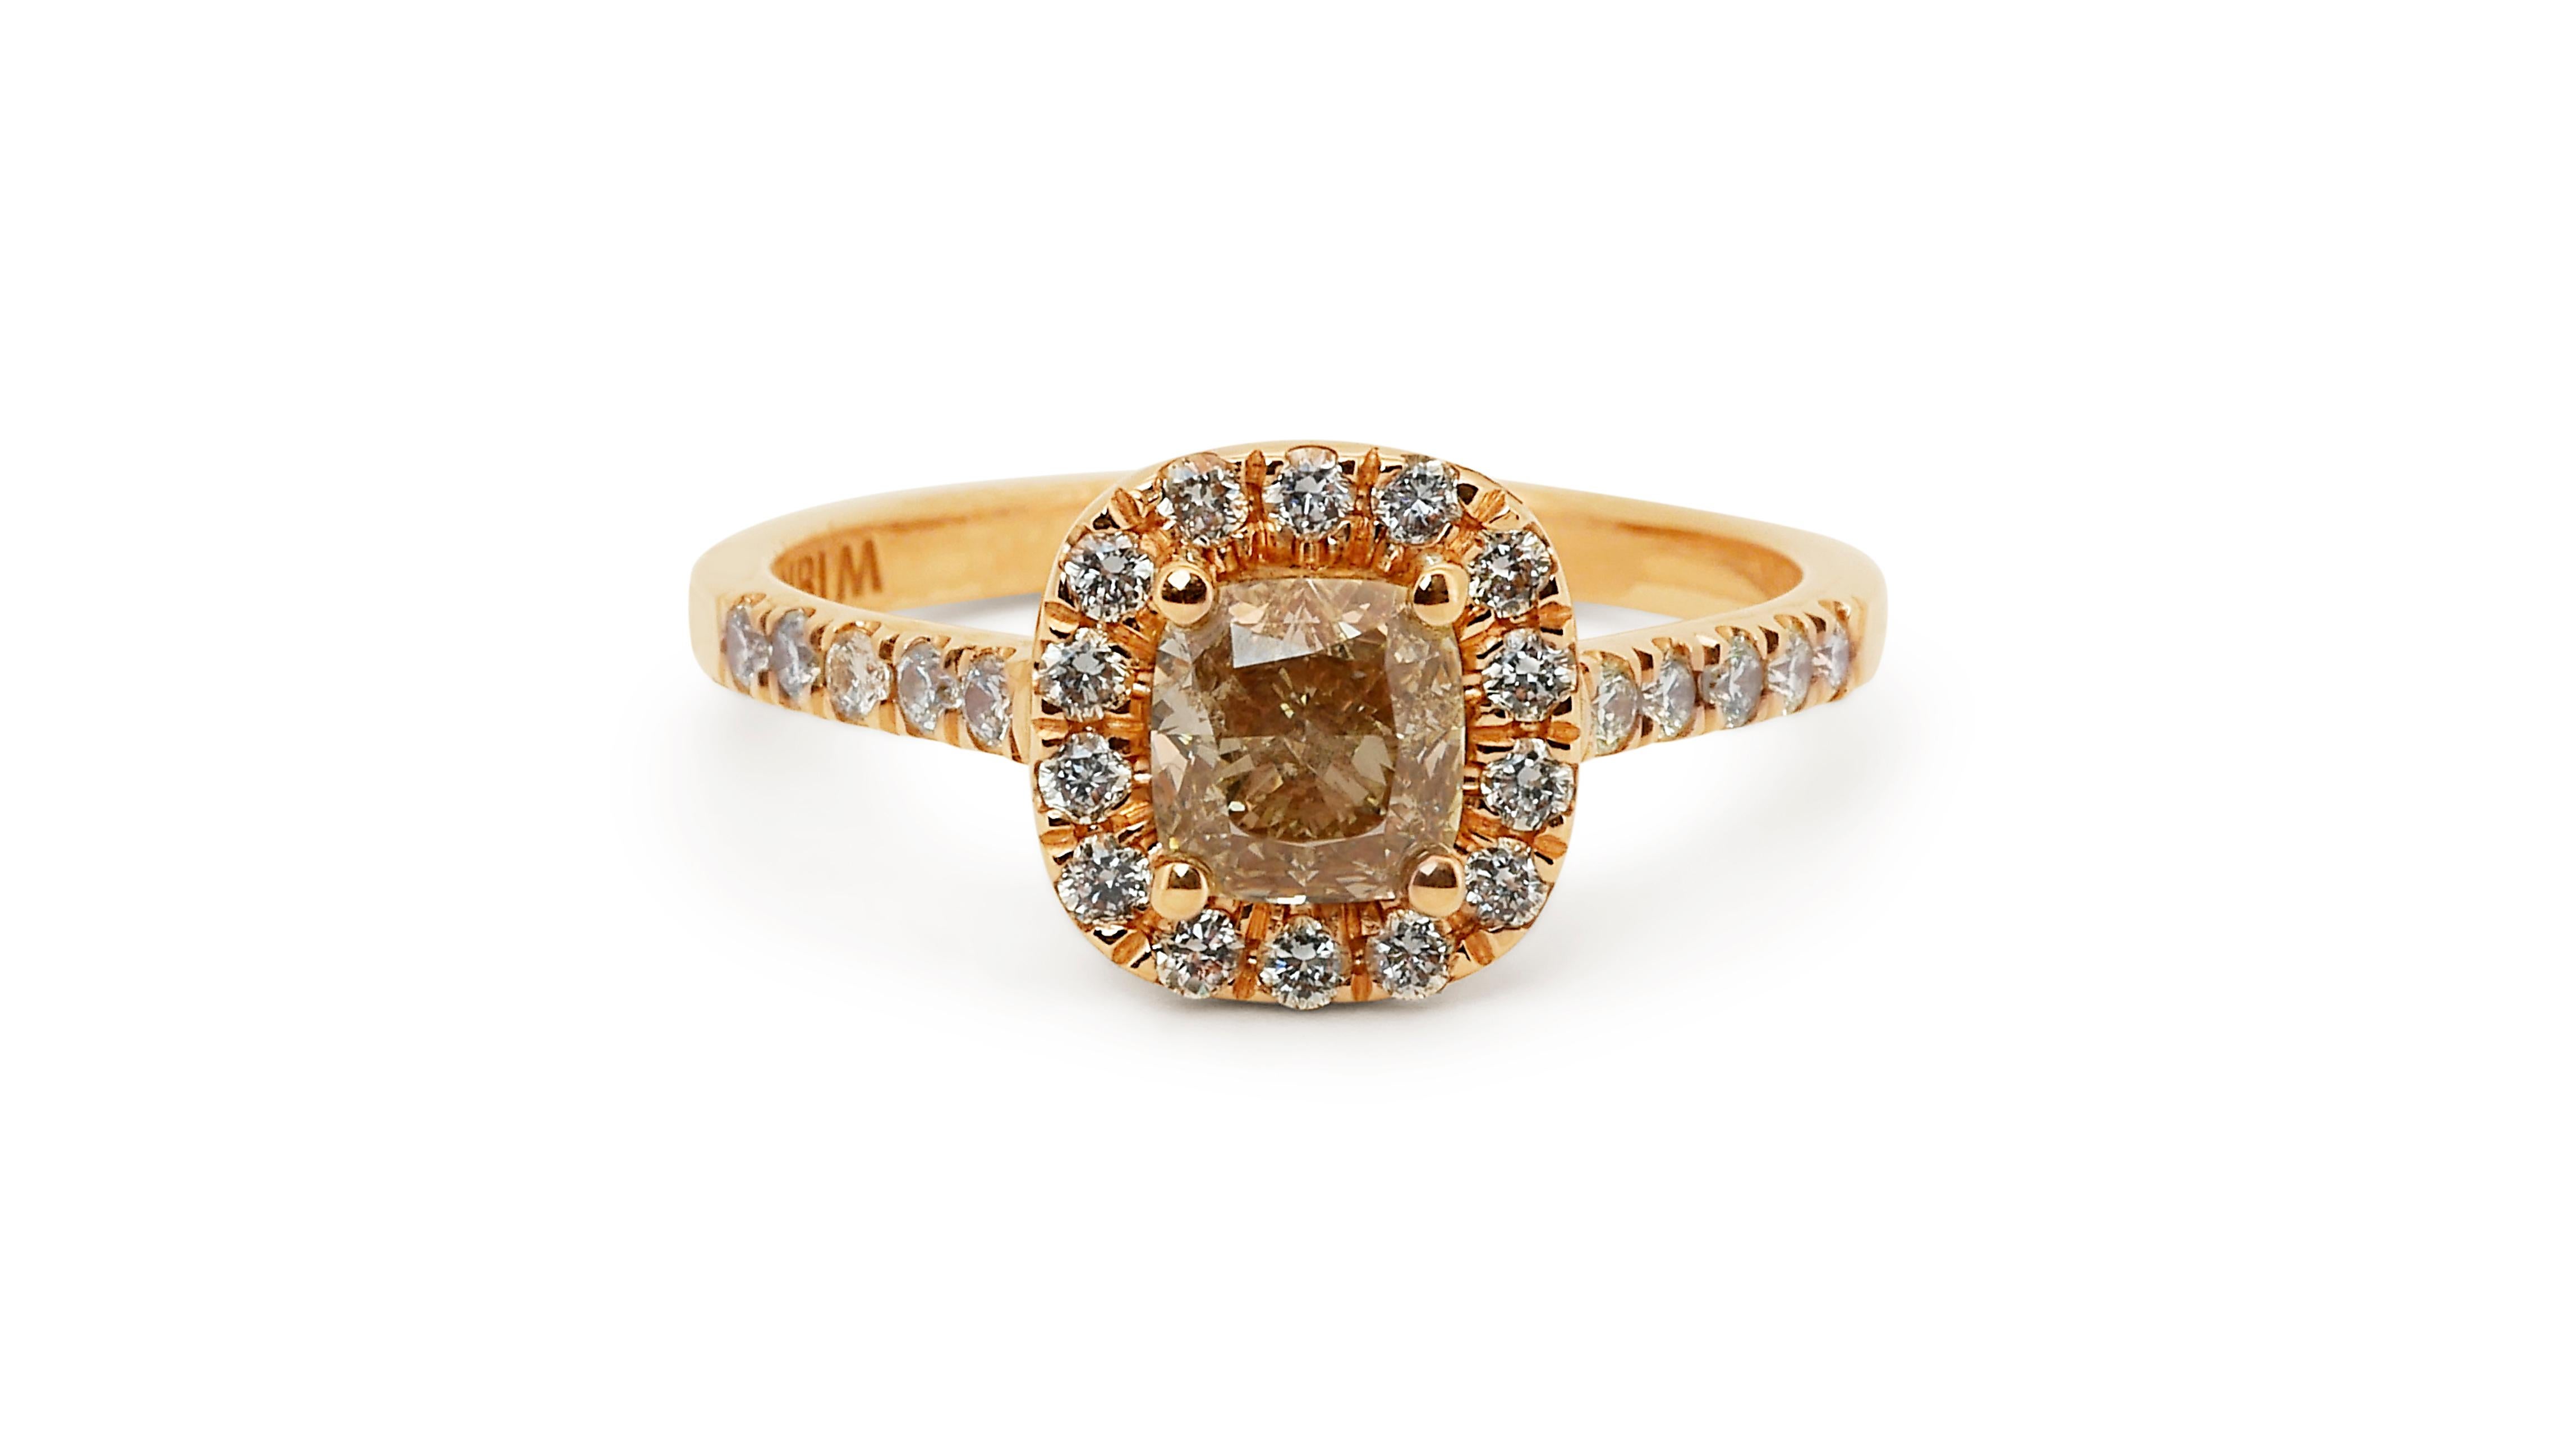 A beautiful cluster halo ring with a dazzling 0.83 carat cushion natural diamond. It has 0.33 carat of side diamonds which add more to its elegance. The jewelry is made of 18K Rose Gold with a high quality polish. It comes with AIG certificate and a